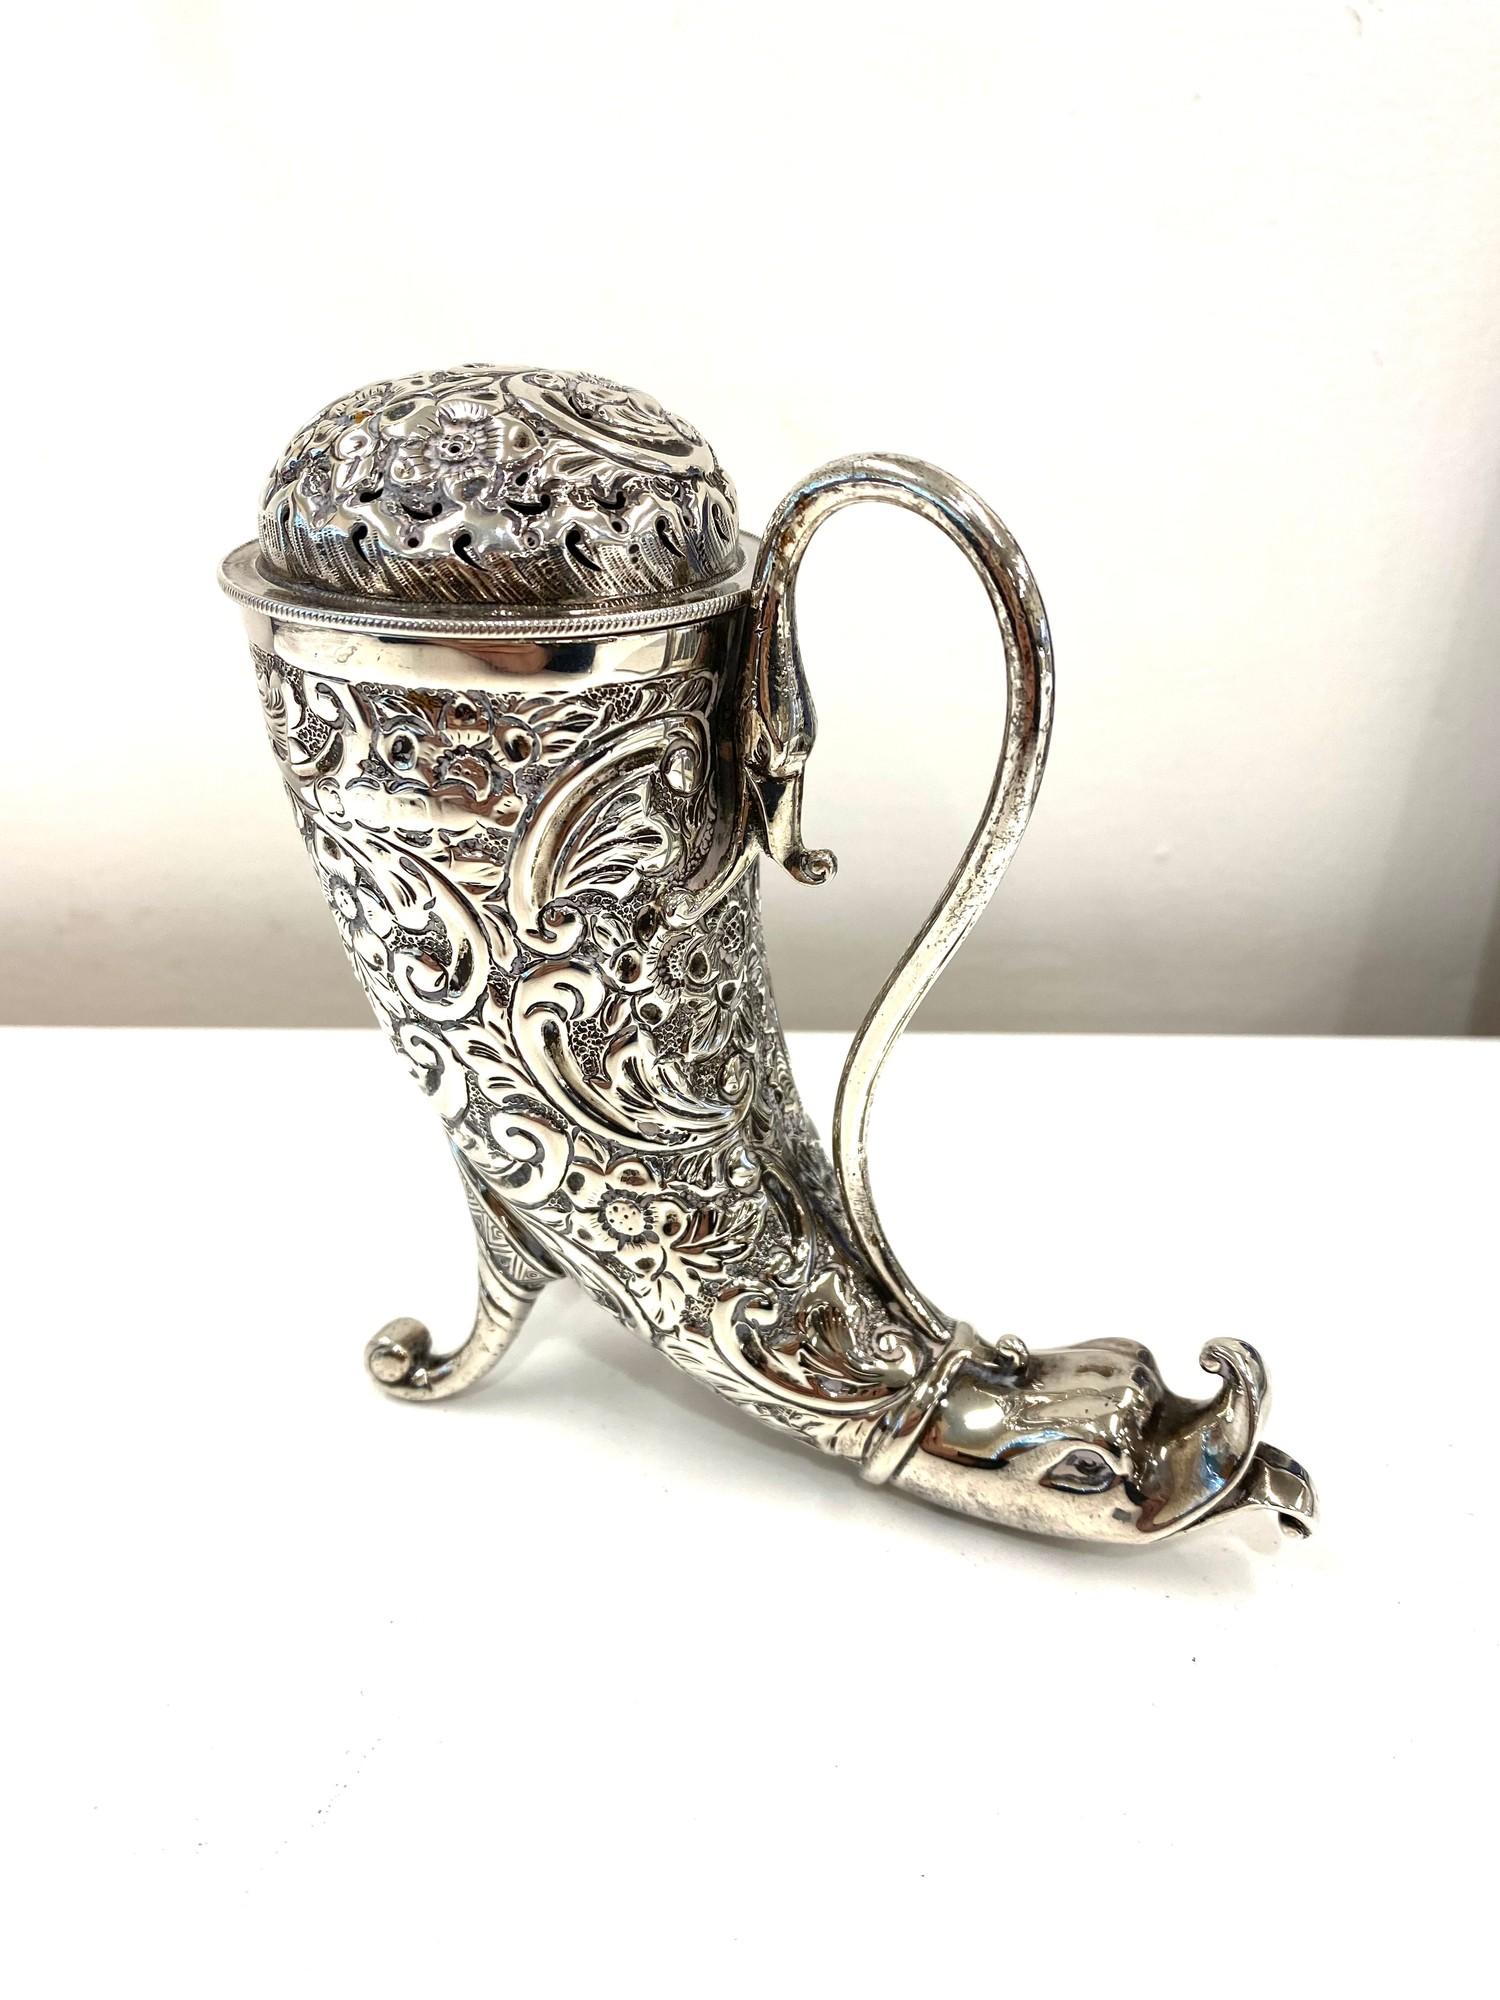 Hallmarked silver horn shape decorative sifter, approximate weight: 156g - Image 3 of 6